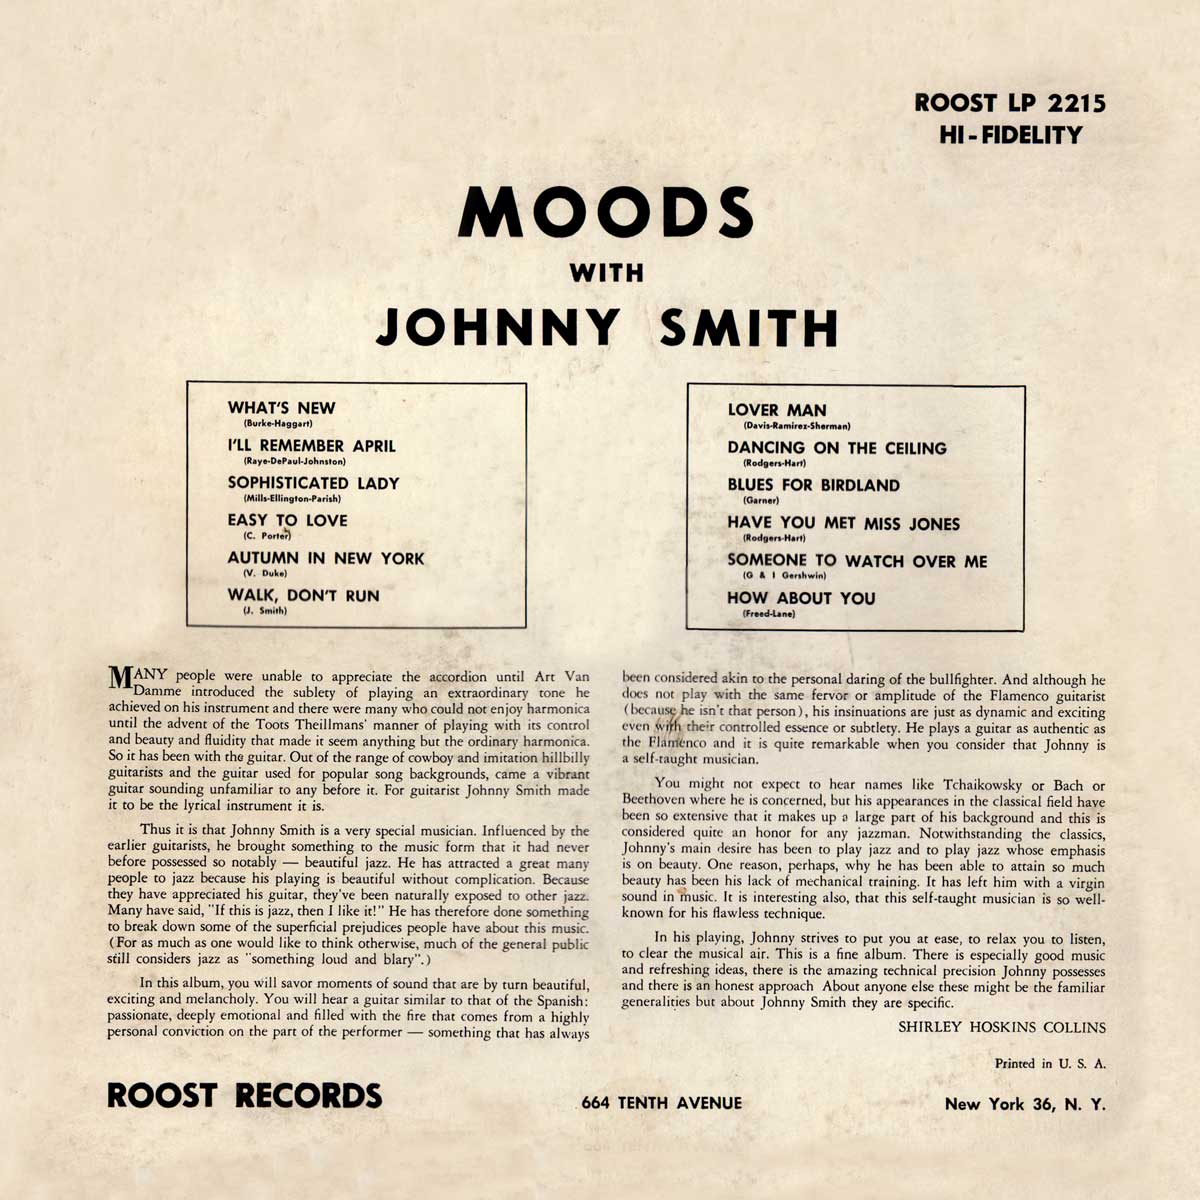 Johnny Smith - Moods - Back cover